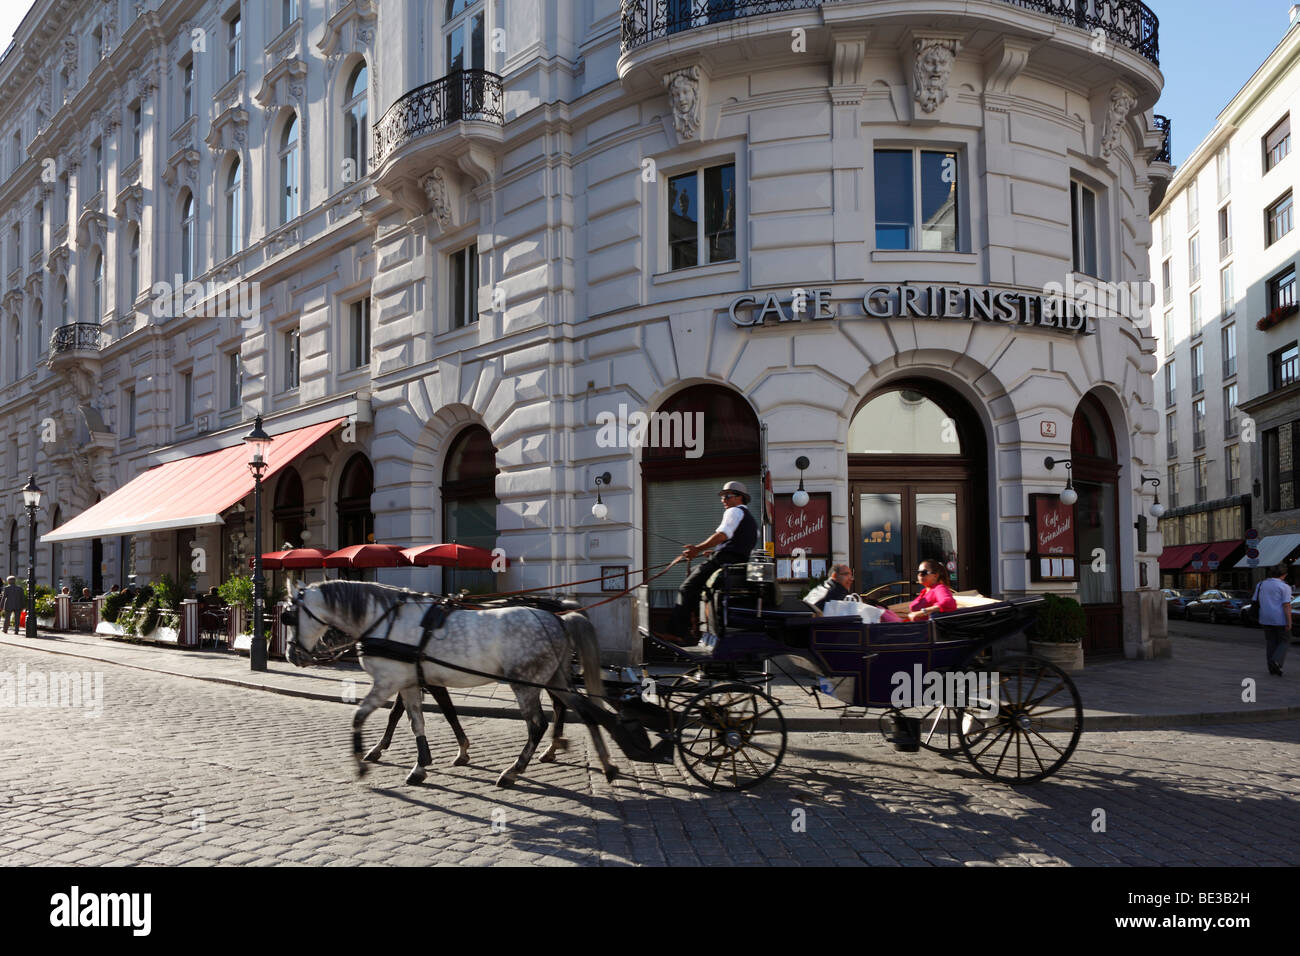 Restaurant Carriage High Resolution Stock Photography and Images - Alamy